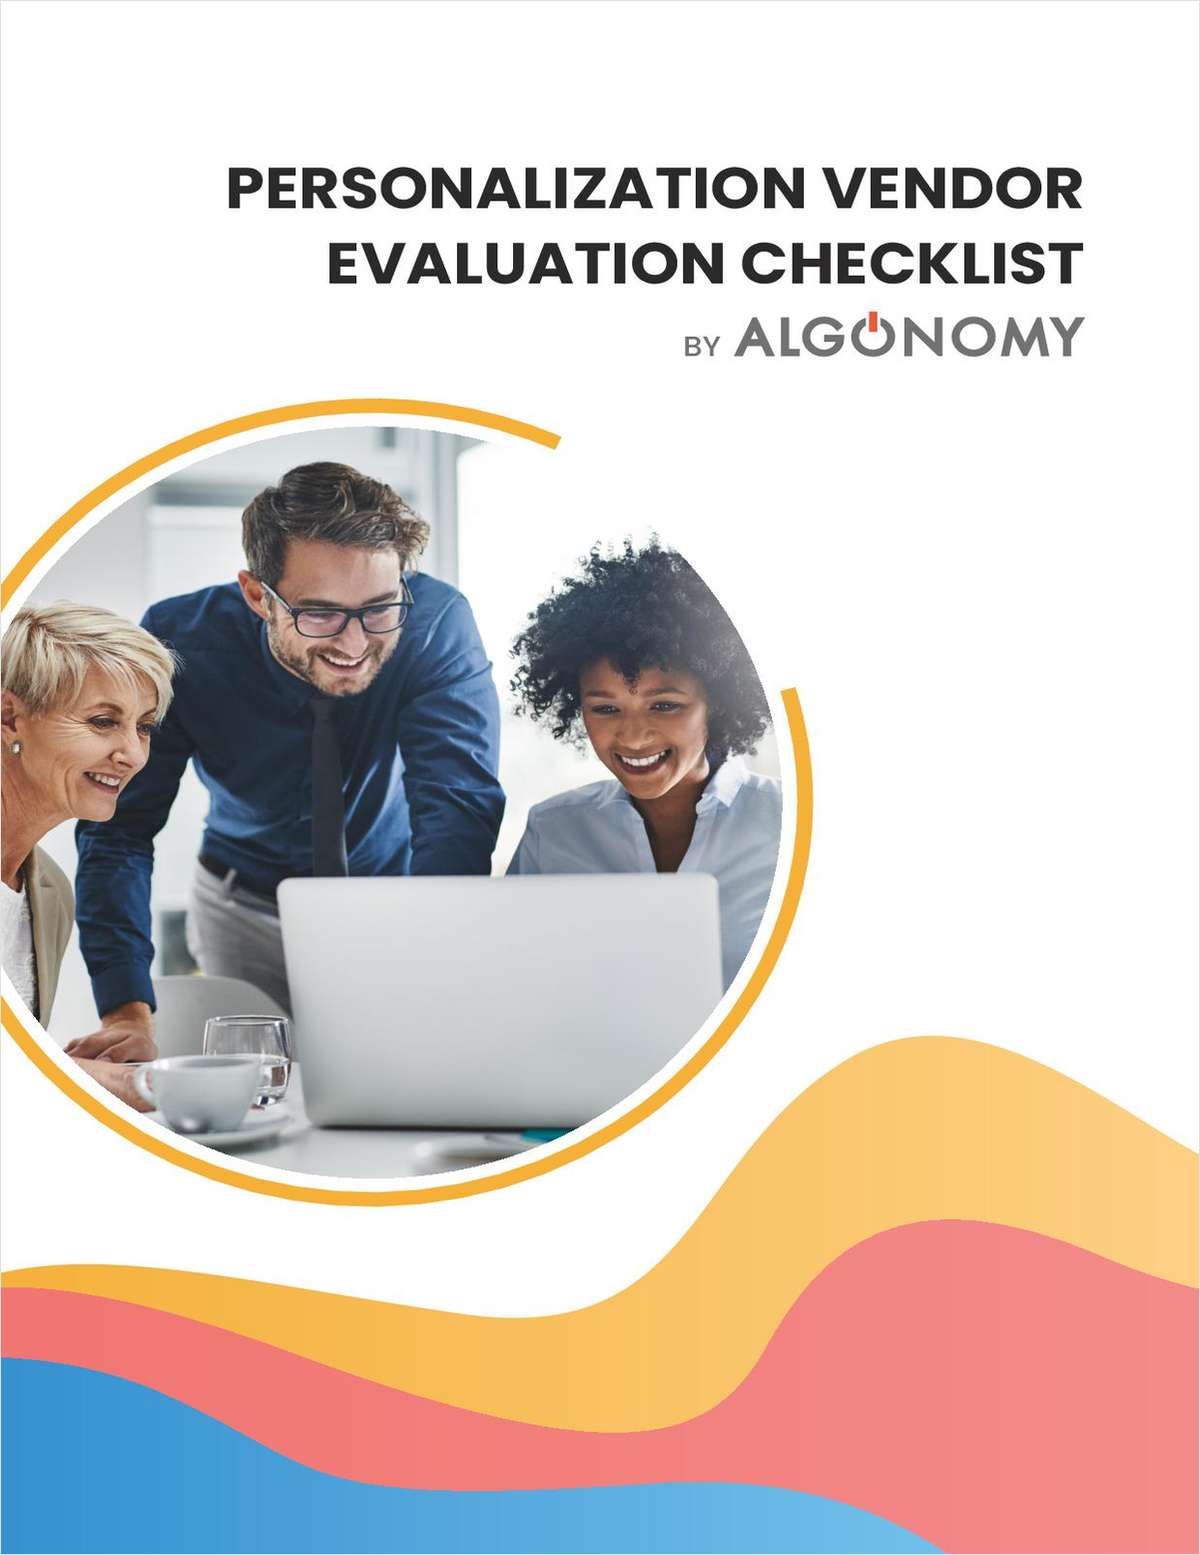 Does your Search Provider Offer Personalization Across Search Results, Navigation and Content? Do This Checklist for an Evaluation!